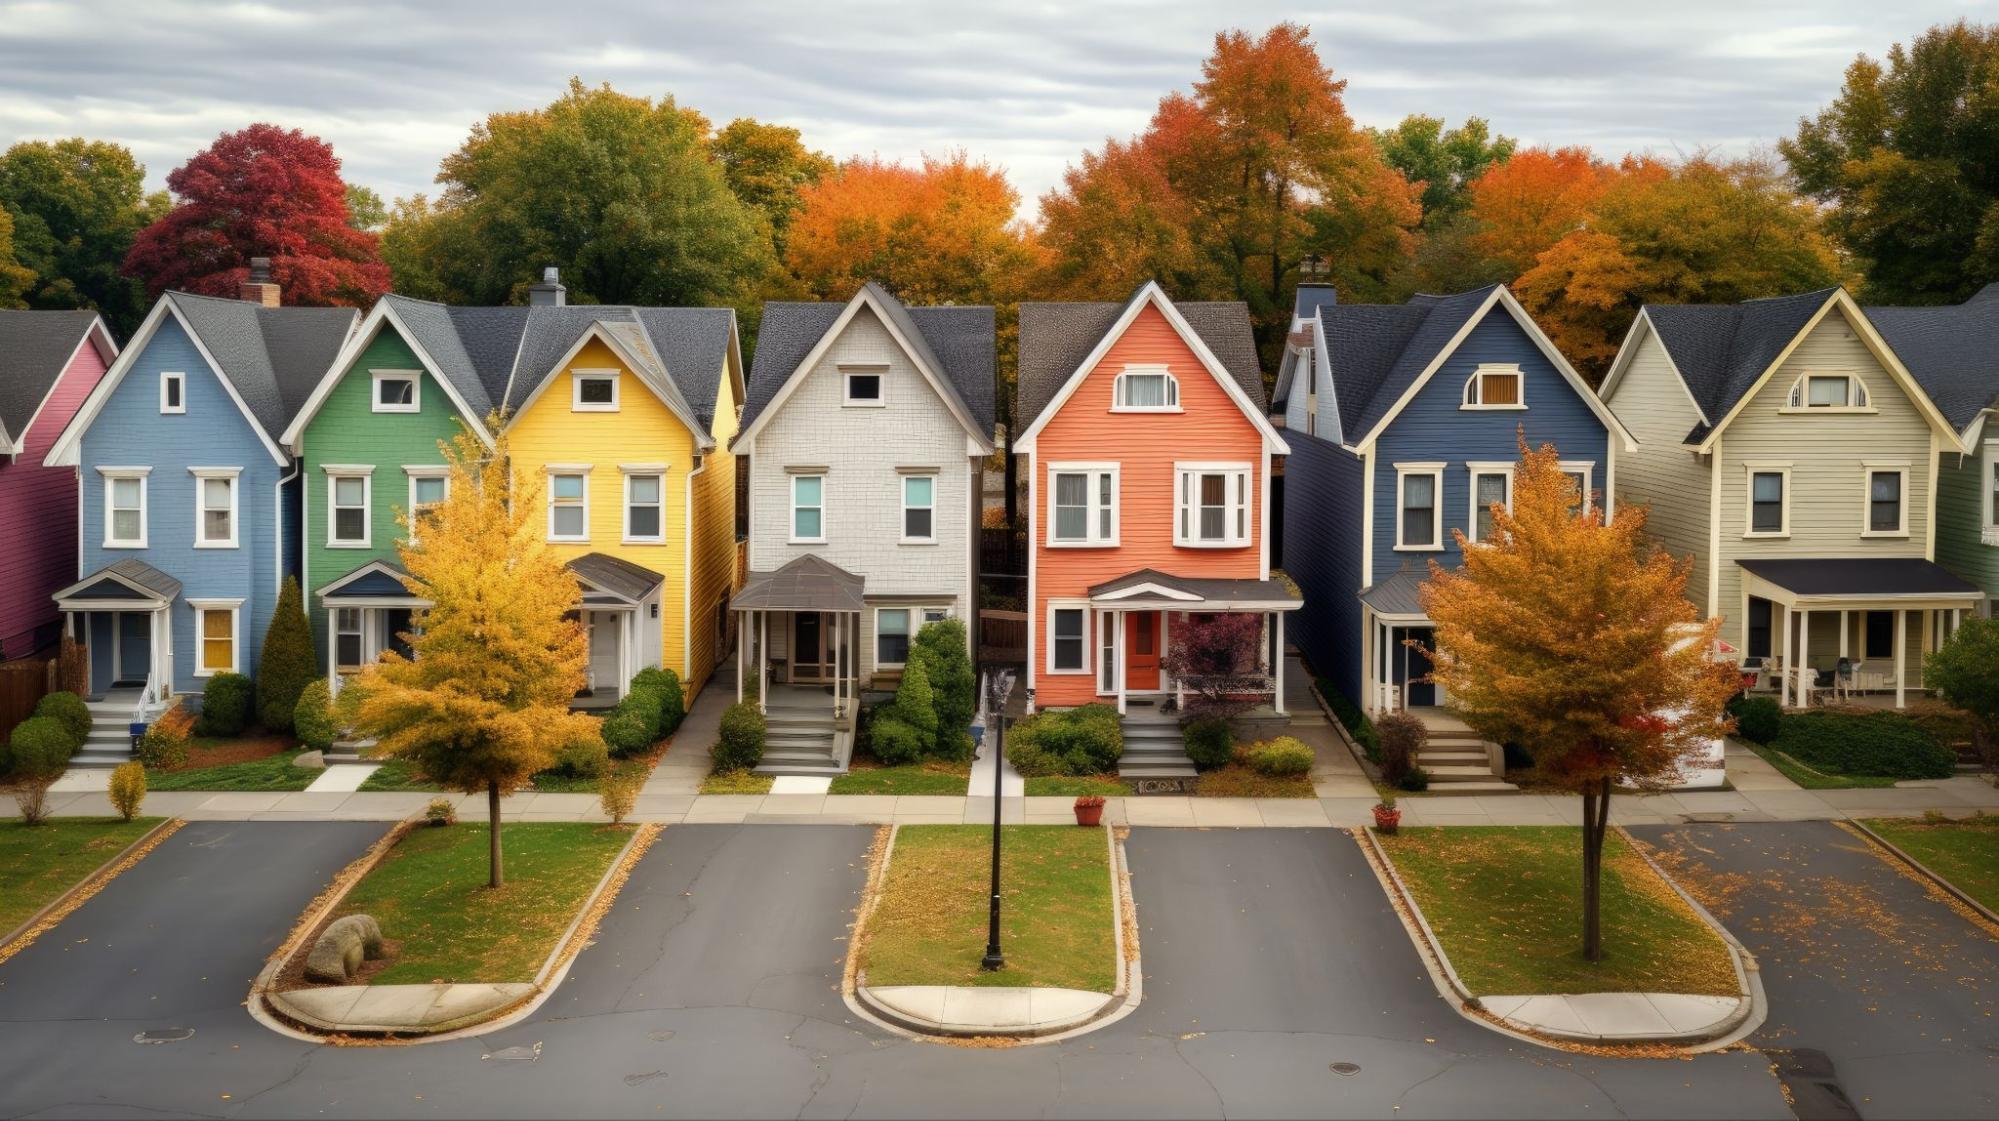 How to Choose the Best Siding Color for Your Home